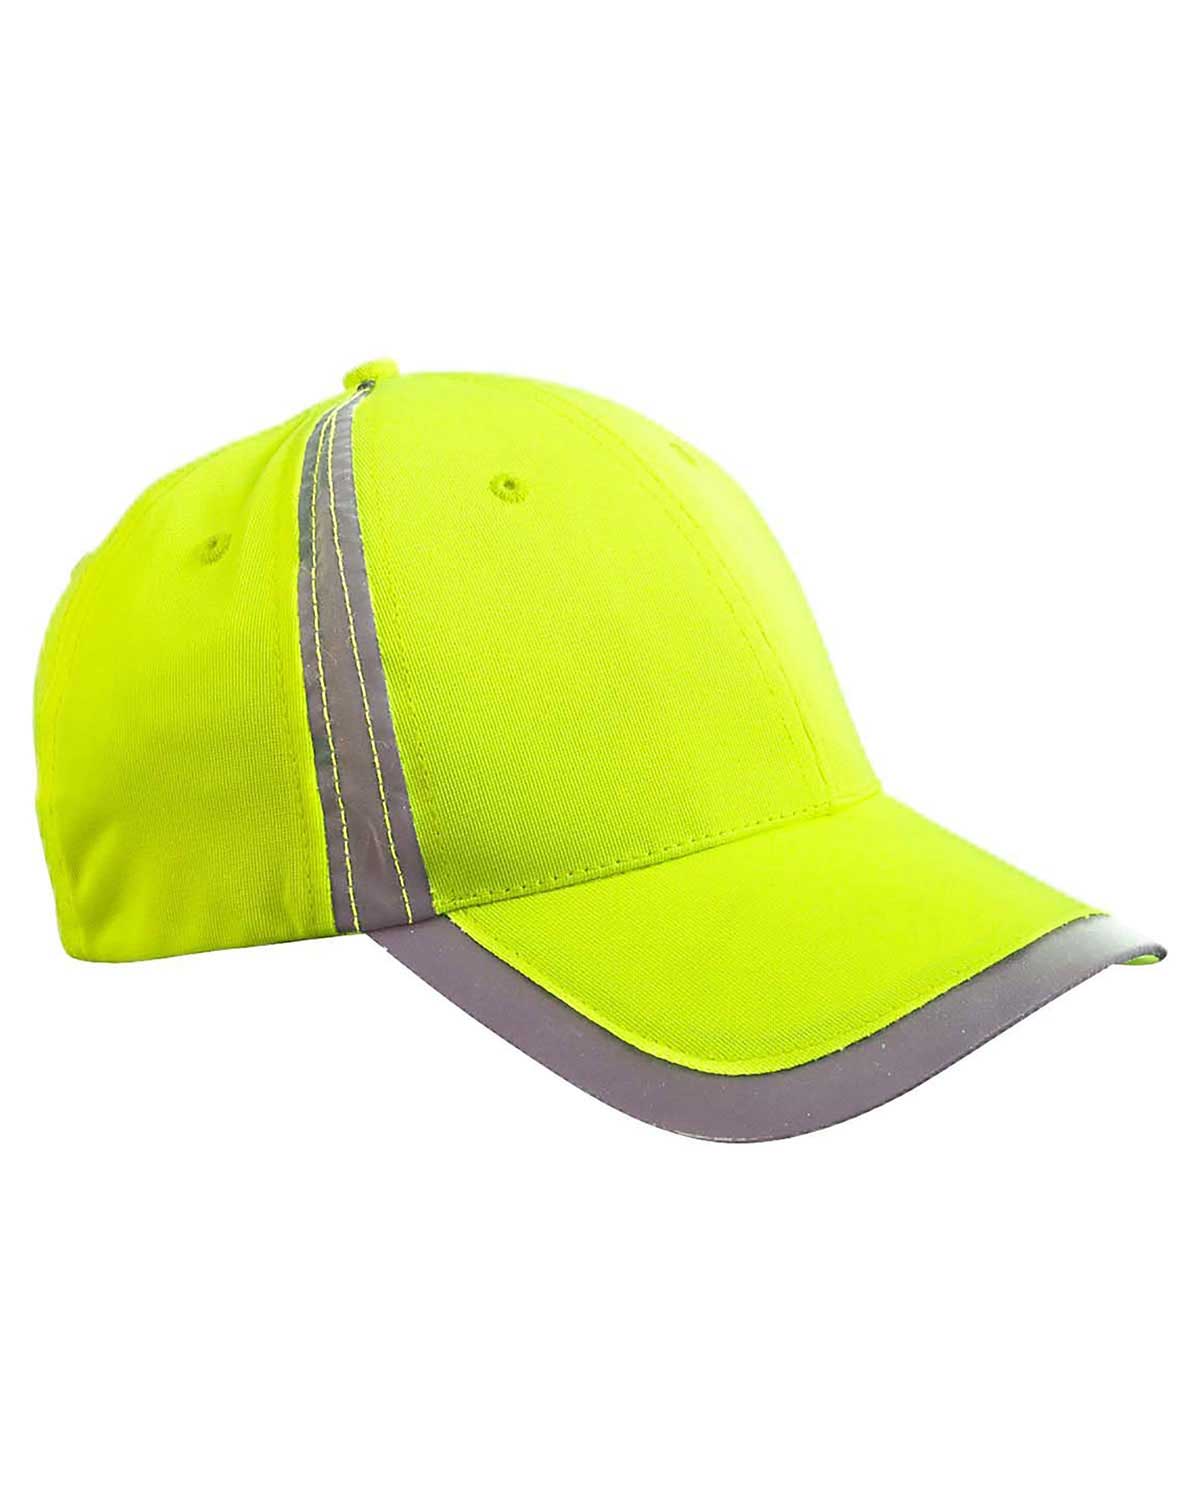 Big Accessories BX023 Unisex Reflective Accent Safety Cap at Apparelstation